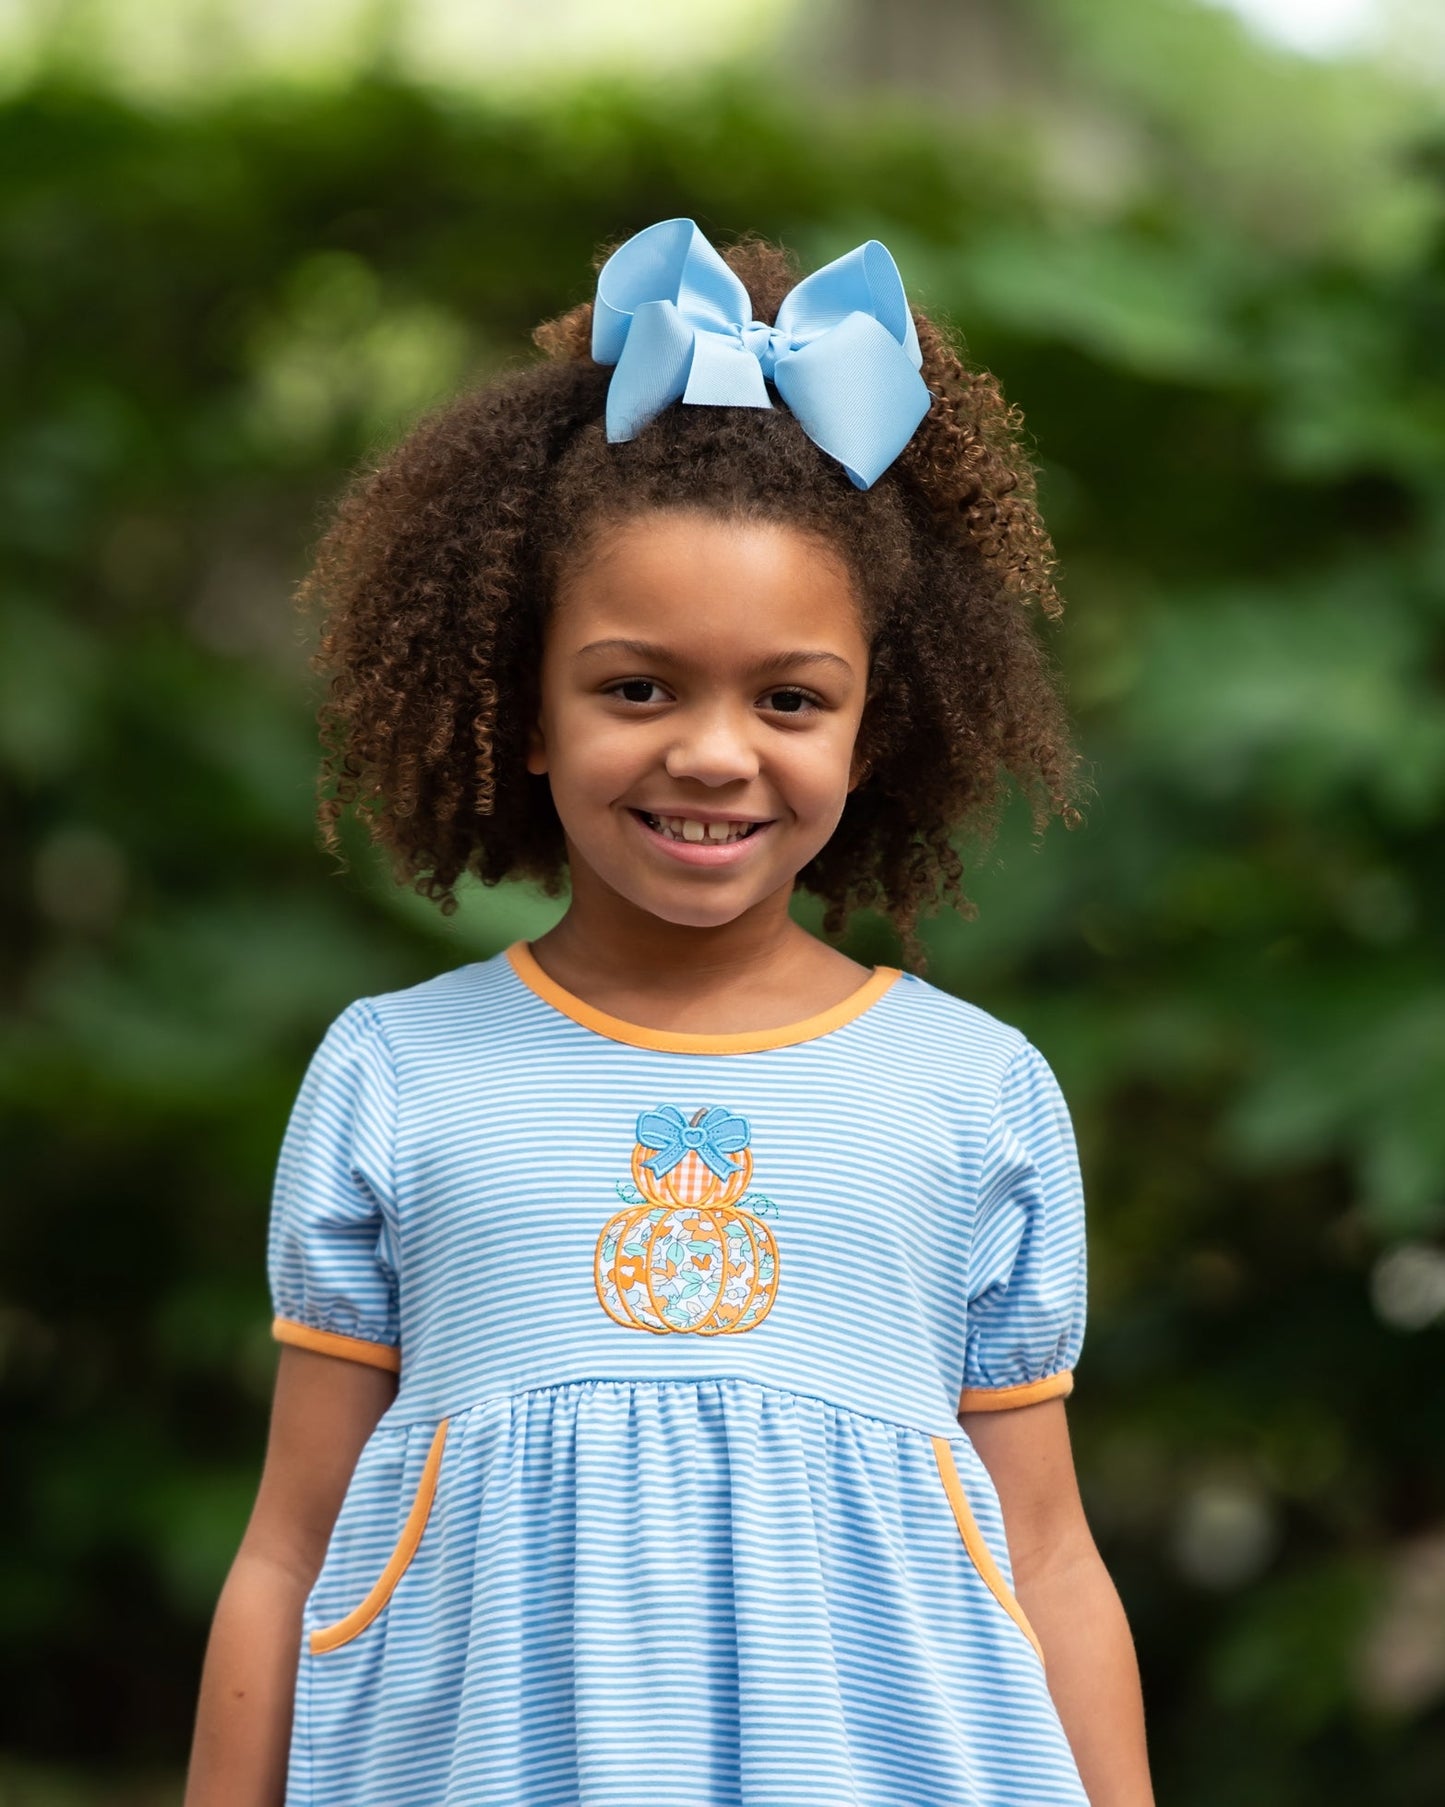 Maggie Pumpkin Stack Pocket Dress by Jellybean Smock Candy